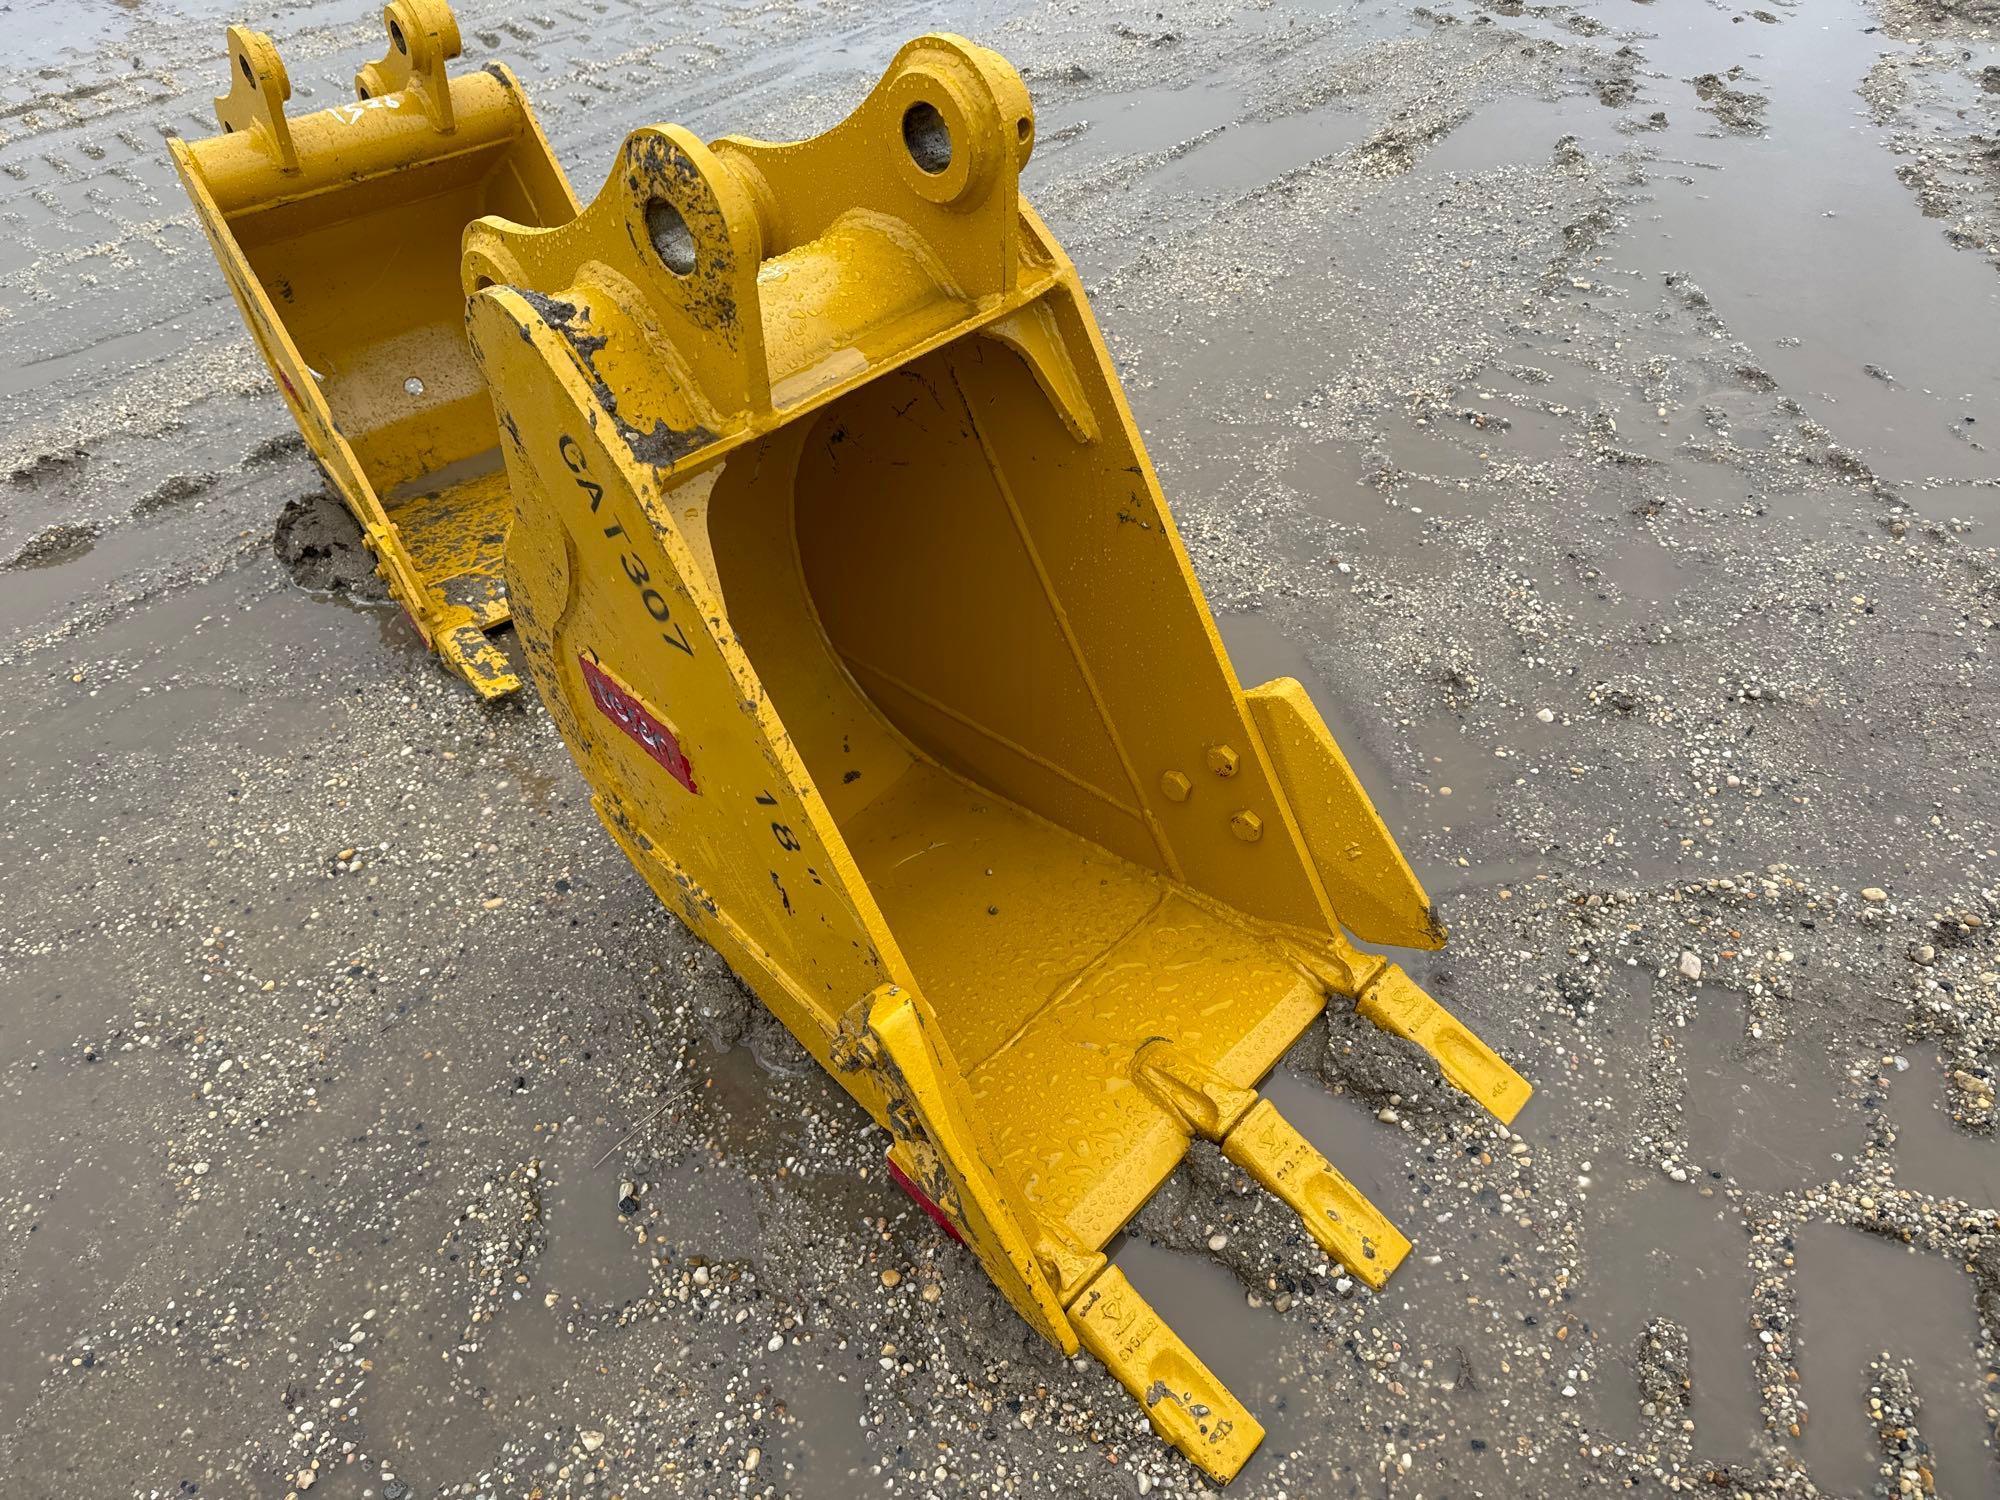 NEW TERAN 18IN. DIGGING BUCKET EXCAVATOR BUCKET FOR CAT 307 WITH SIDE CUTTERS, REINFORCEMENT PLATES